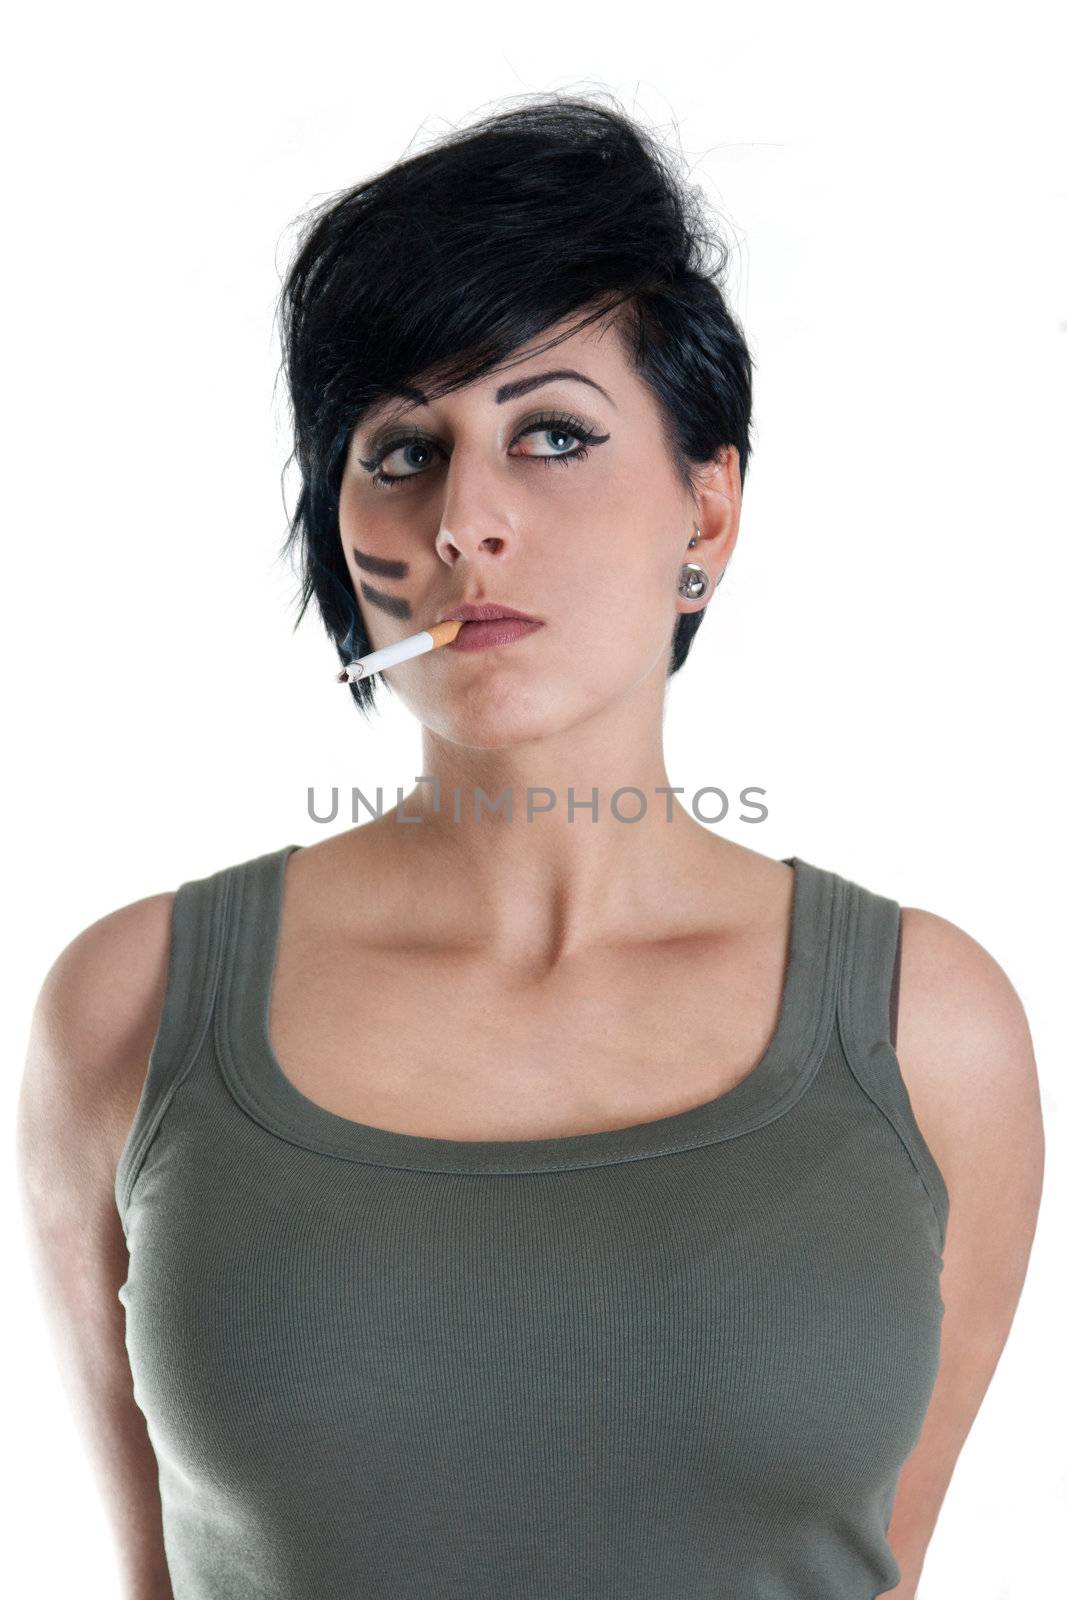 young woman in green top is smoking a cigarette - isolated on white background